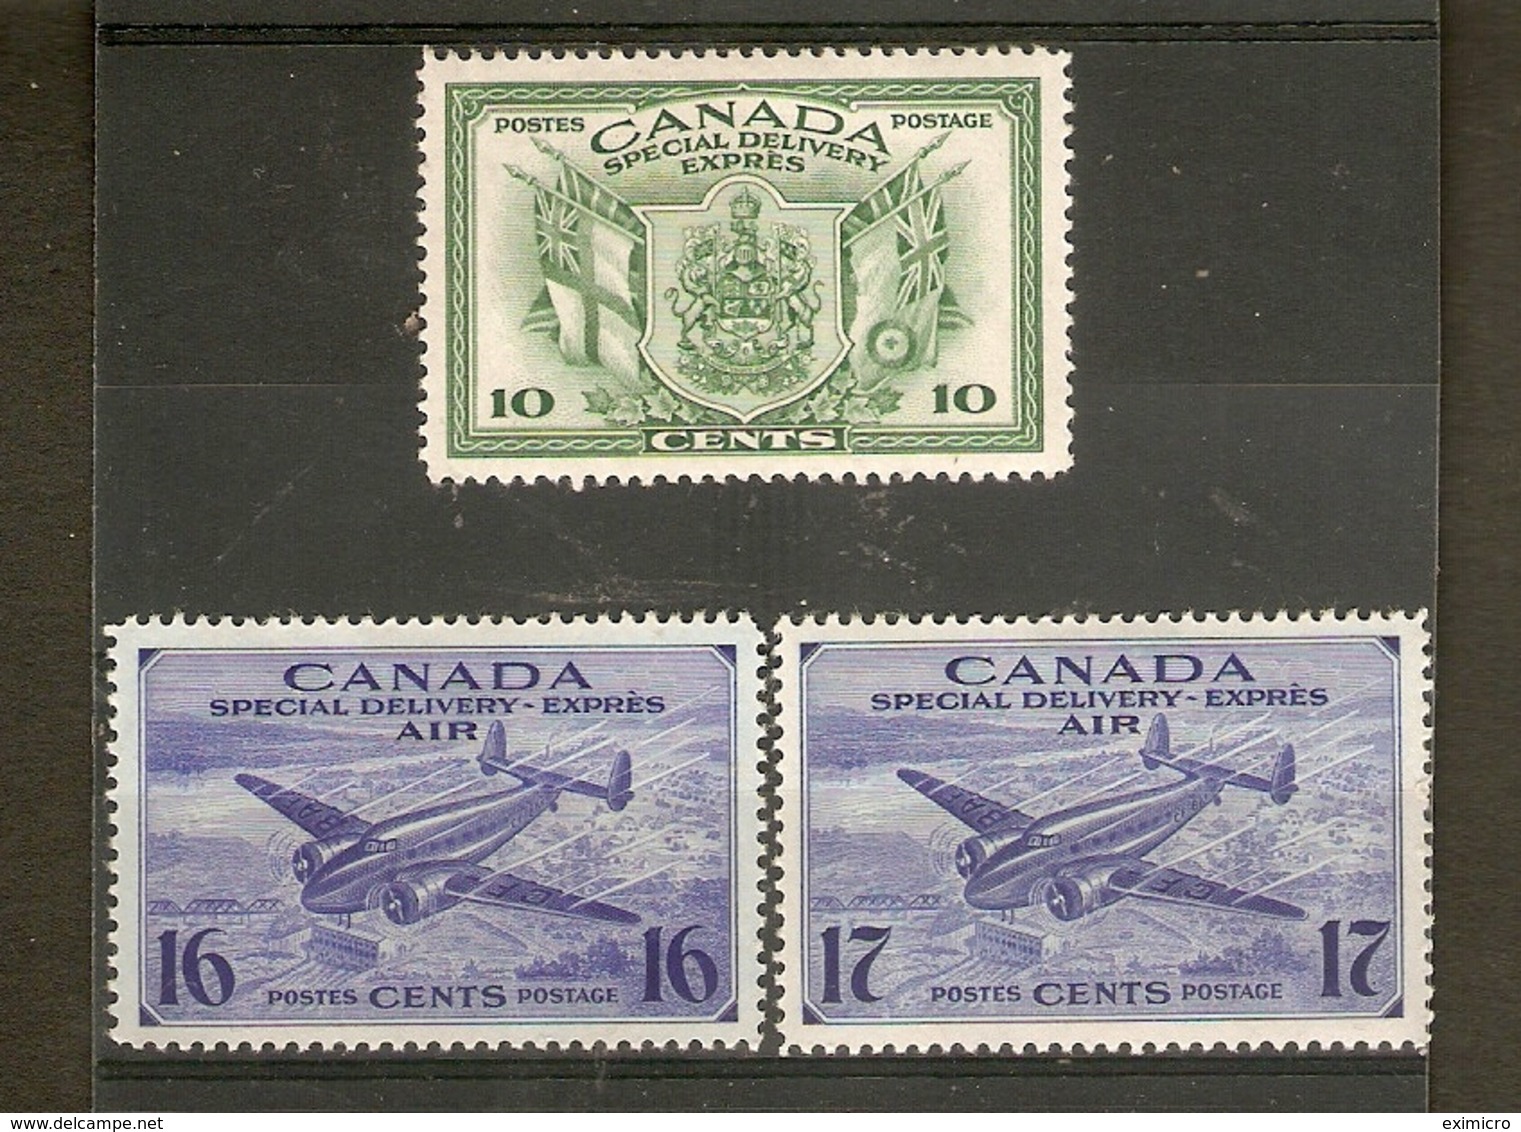 CANADA 1942 - 1943 SPECIAL DELIVERY WAR EFFORT SET SG S12/S14 MOUNTED MINT Cat £24.50 - Airmail: Special Delivery